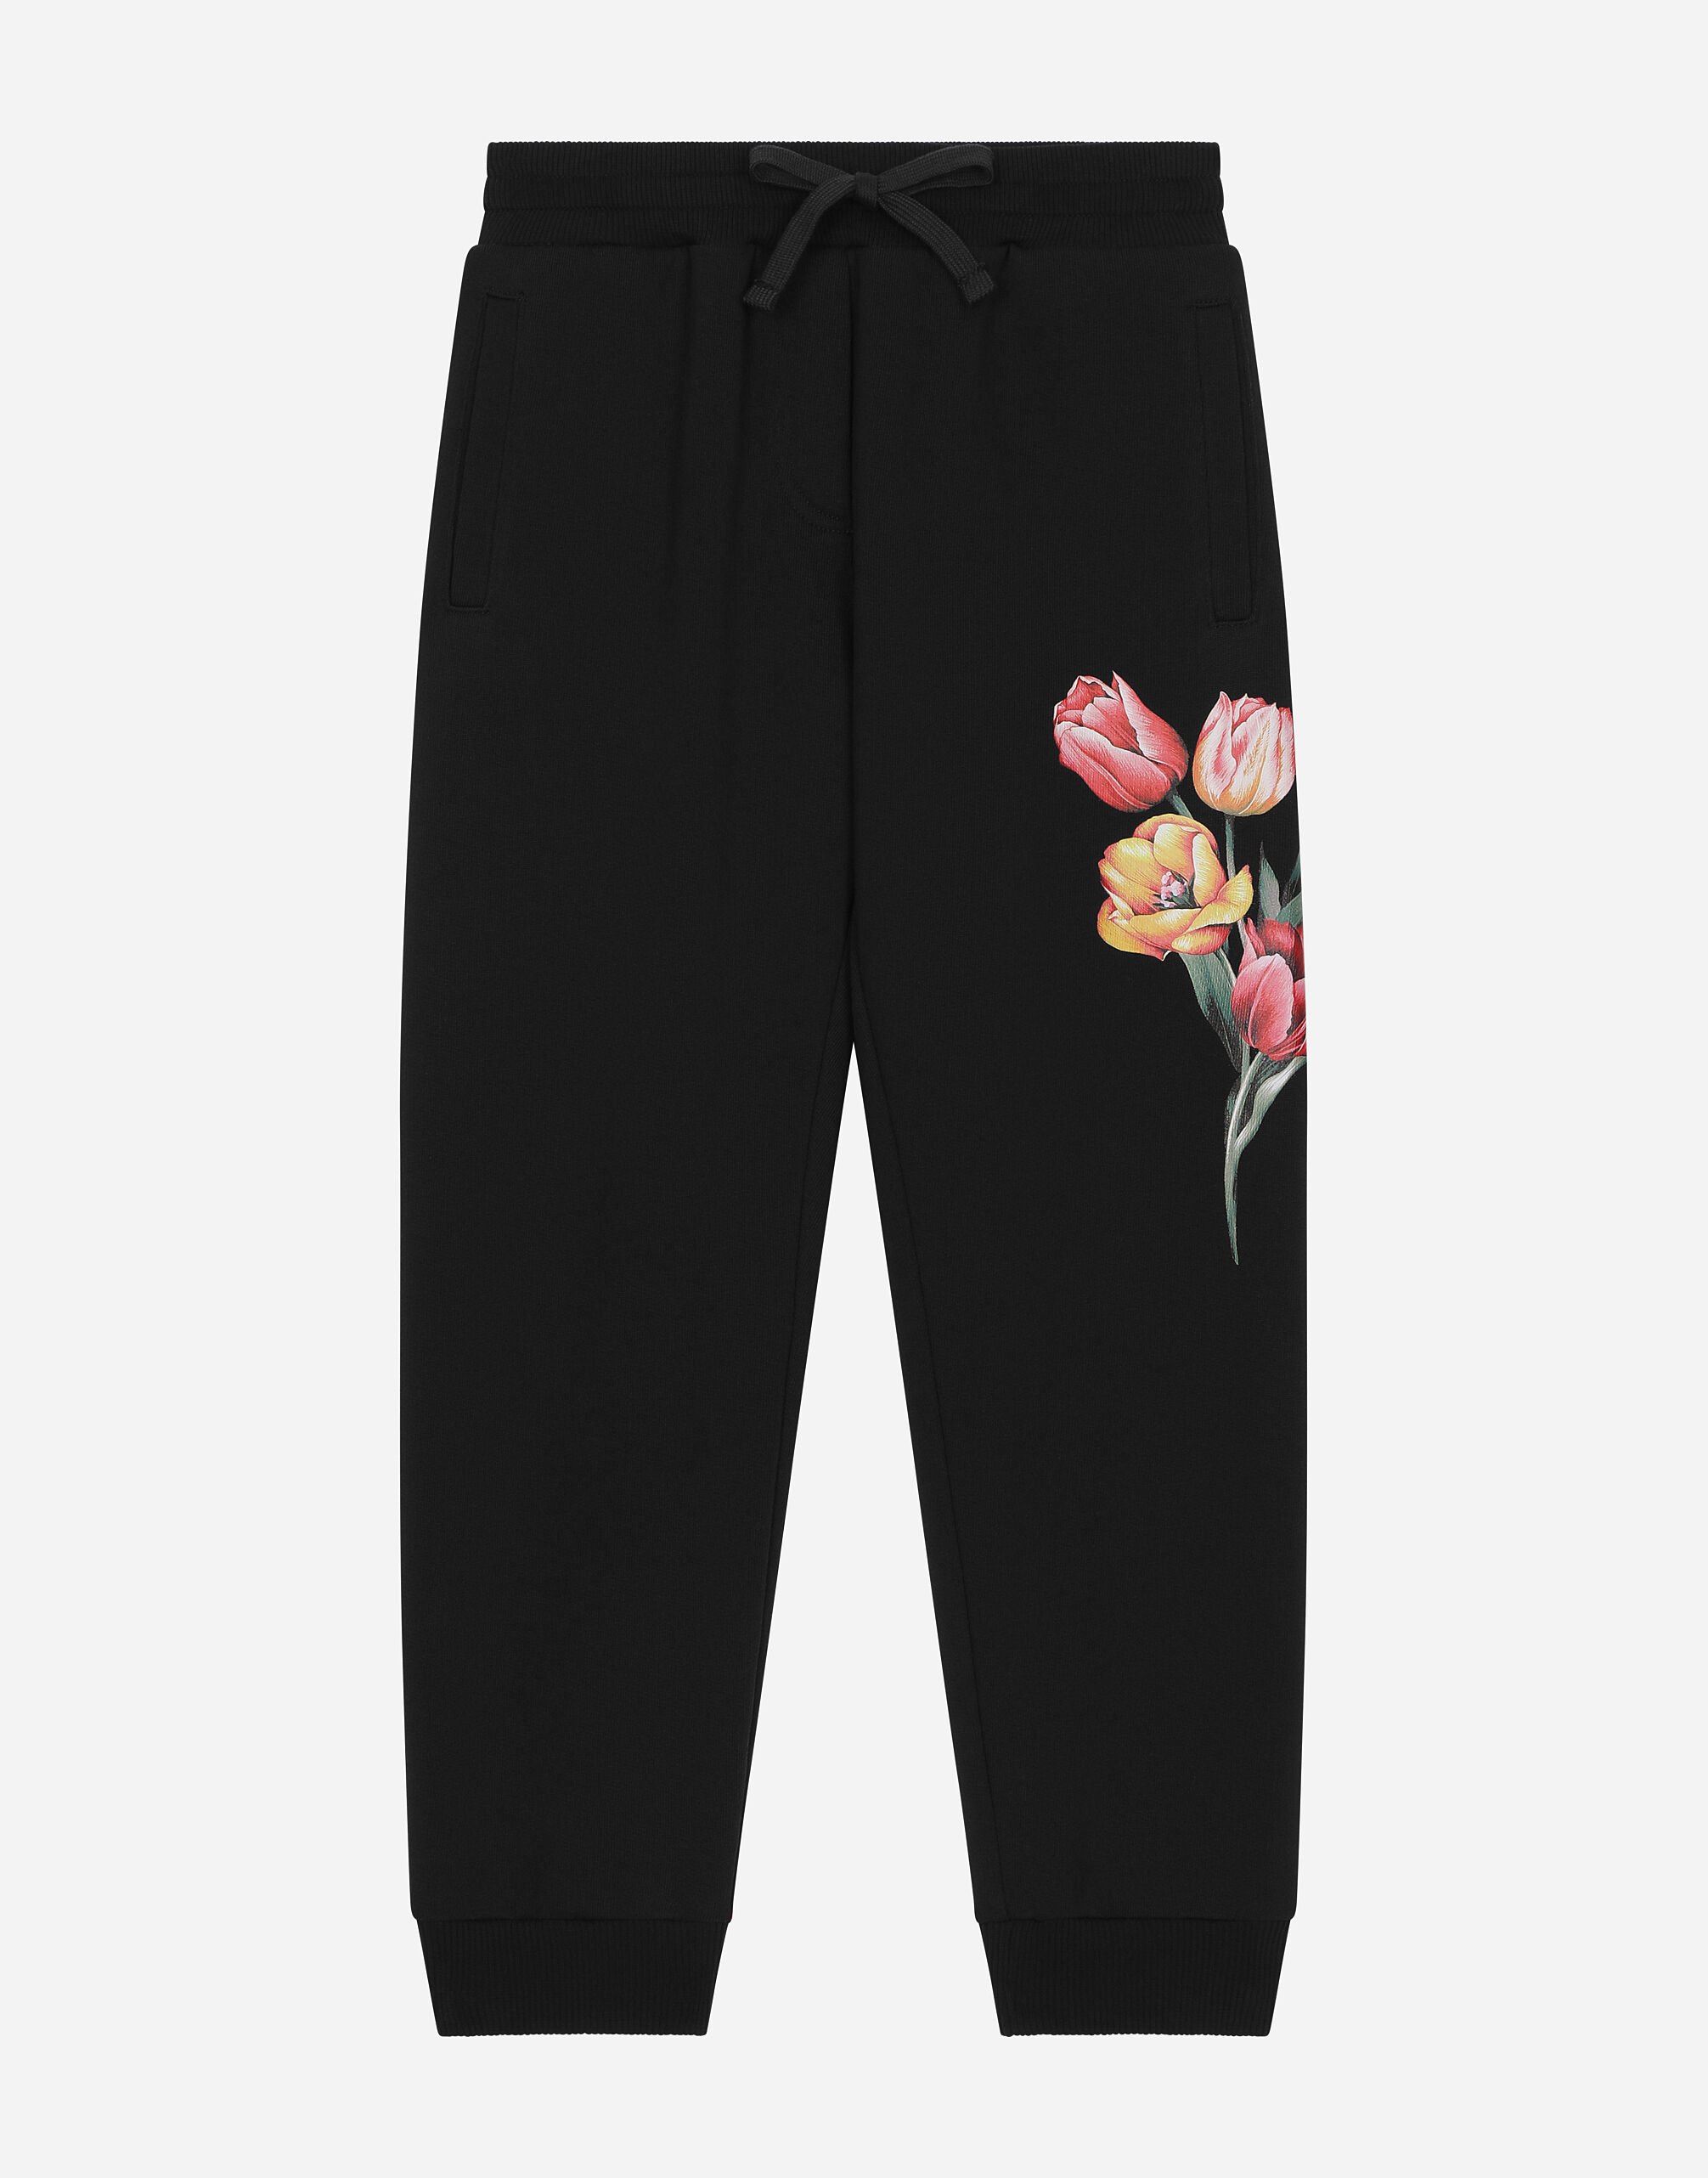 ${brand} Jersey jogging pants with branded tag and floral detailing ${colorDescription} ${masterID}